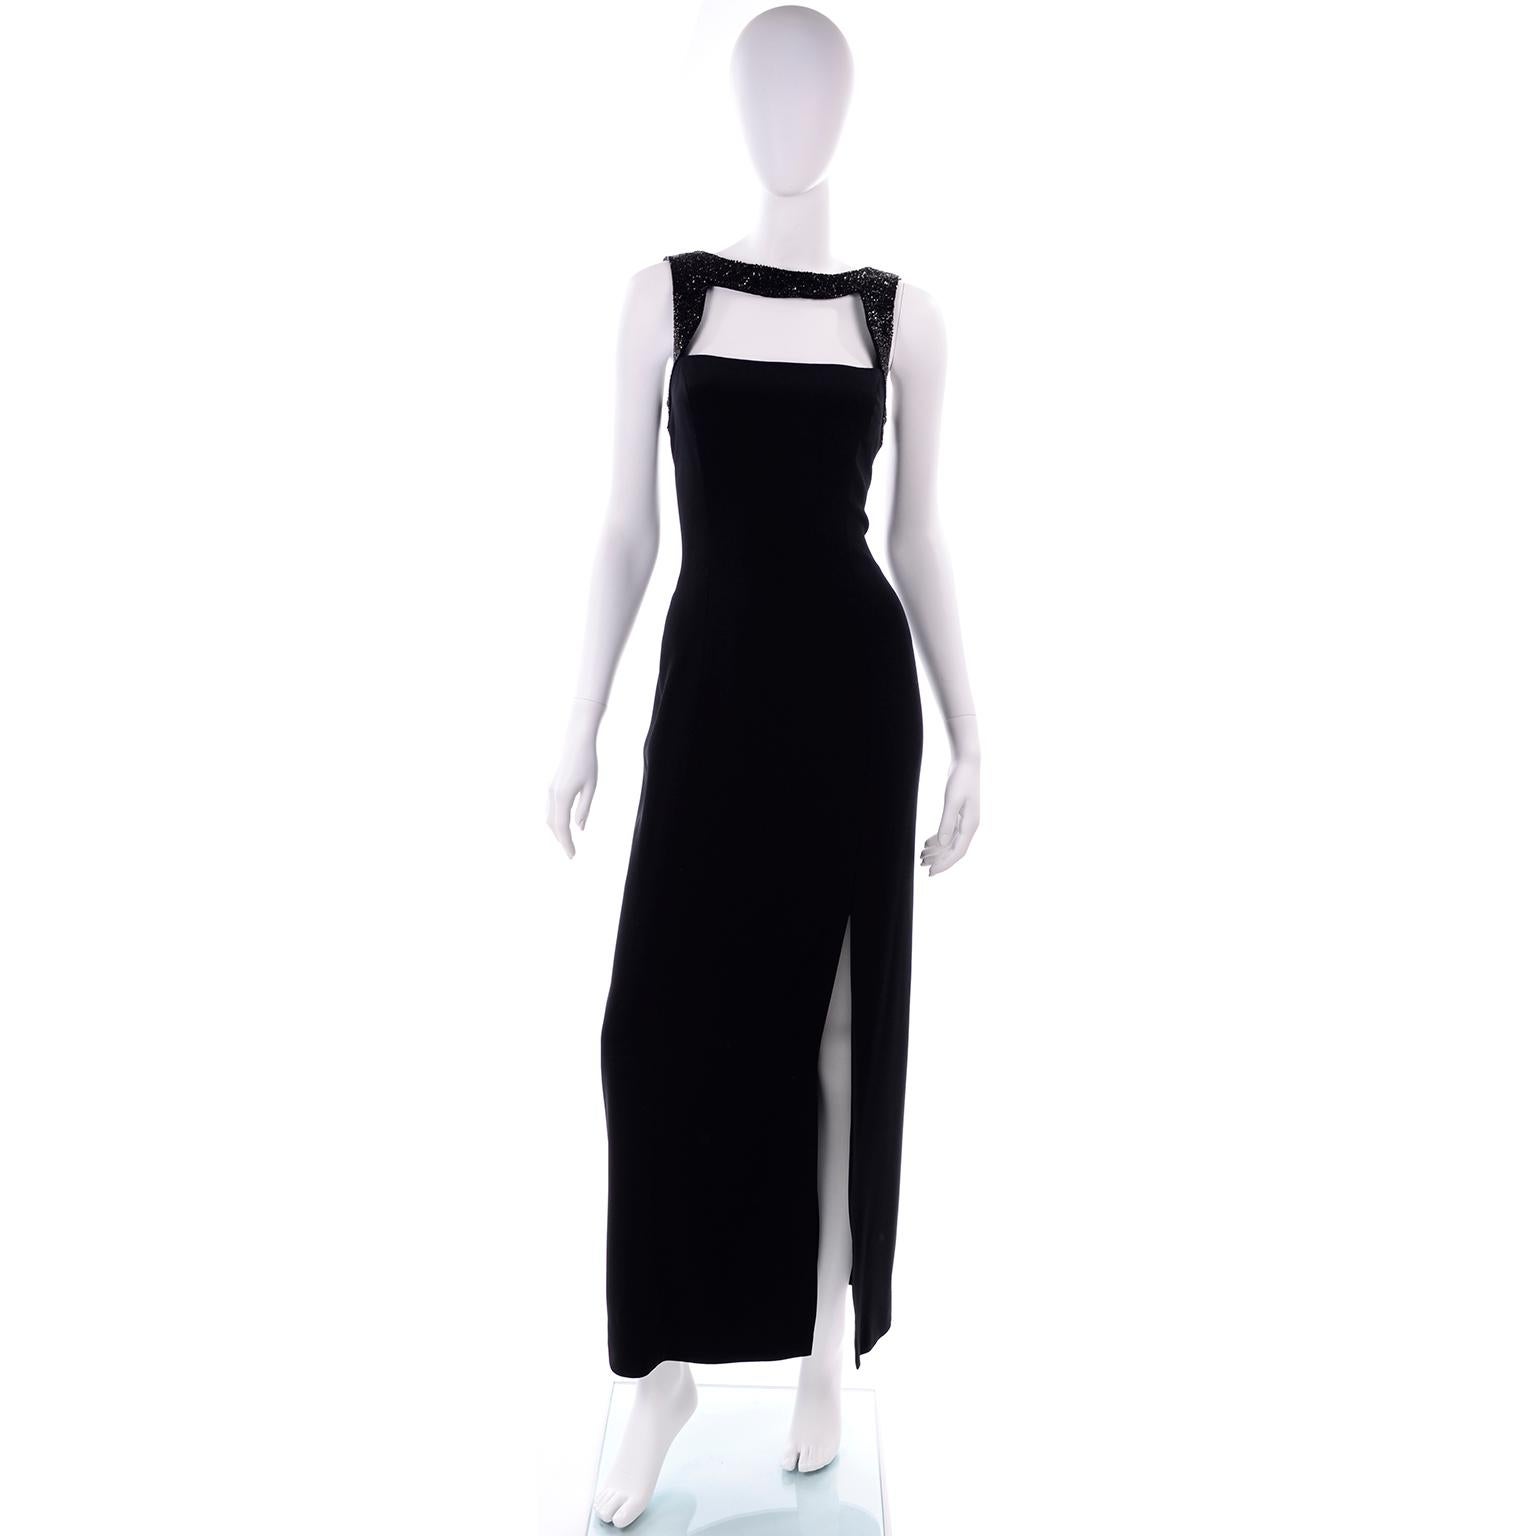 This is a show stopping vintage black Oleg Cassini Black Tie evening gown with a 24